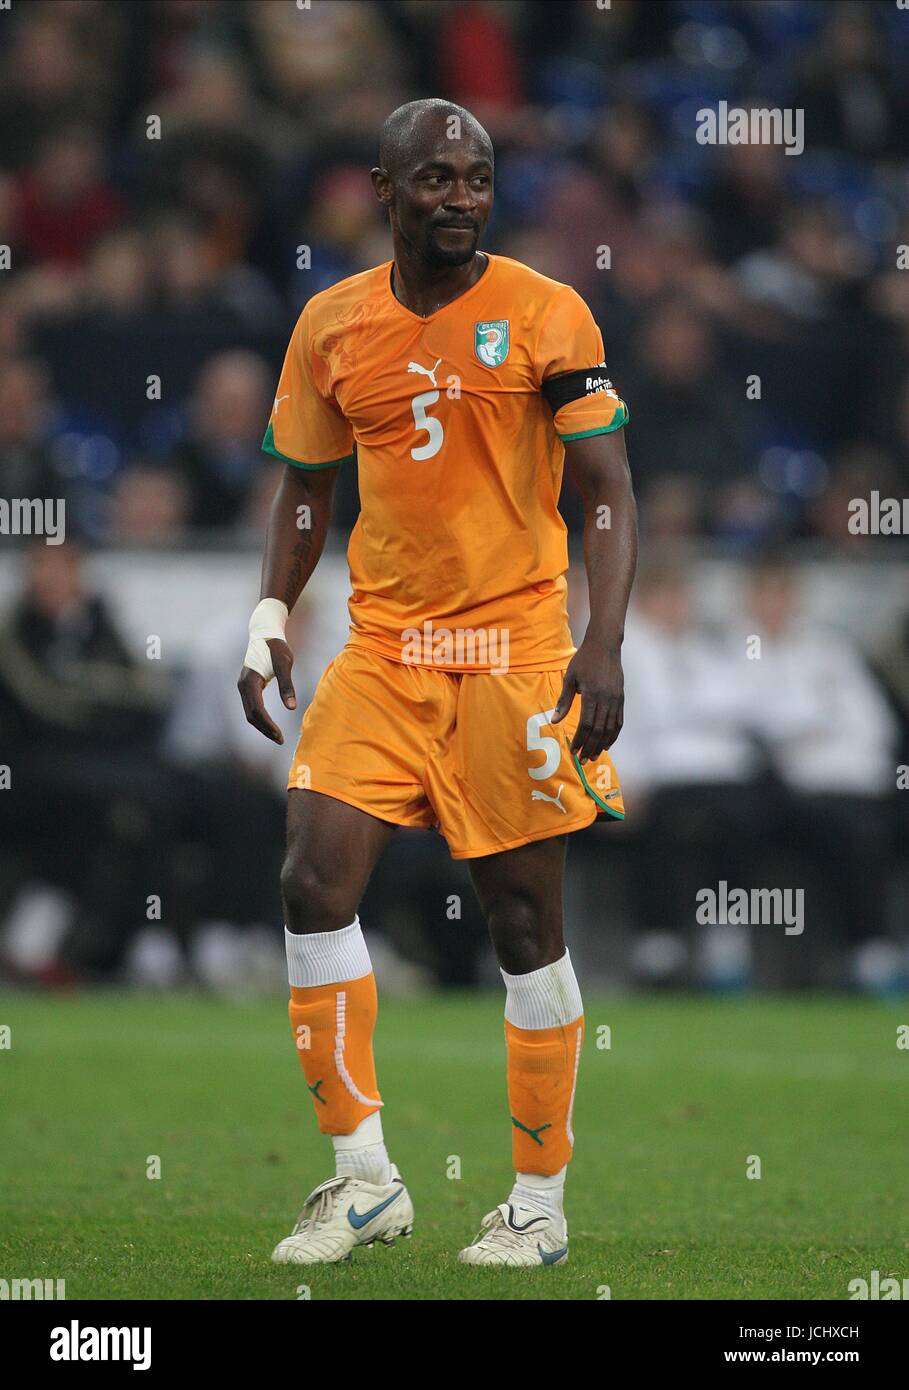 DIDIER ZOKORA IVORY COAST GERMANY V IVORY COAST VELTINS ARENA, GELSENKIRCHEN, GERMANY 18 November 2009 GAB4691     WARNING! This Photograph May Only Be Used For Newspaper And/Or Magazine Editorial Purposes. May Not Be Used For, Internet/Online Usage Nor For Publications Involving 1 player, 1 Club Or 1 Competition, Without Written Authorisation From Football DataCo Ltd. For Any Queries, Please Contact Football DataCo Ltd on +44 (0) 207 864 9121 Stock Photo